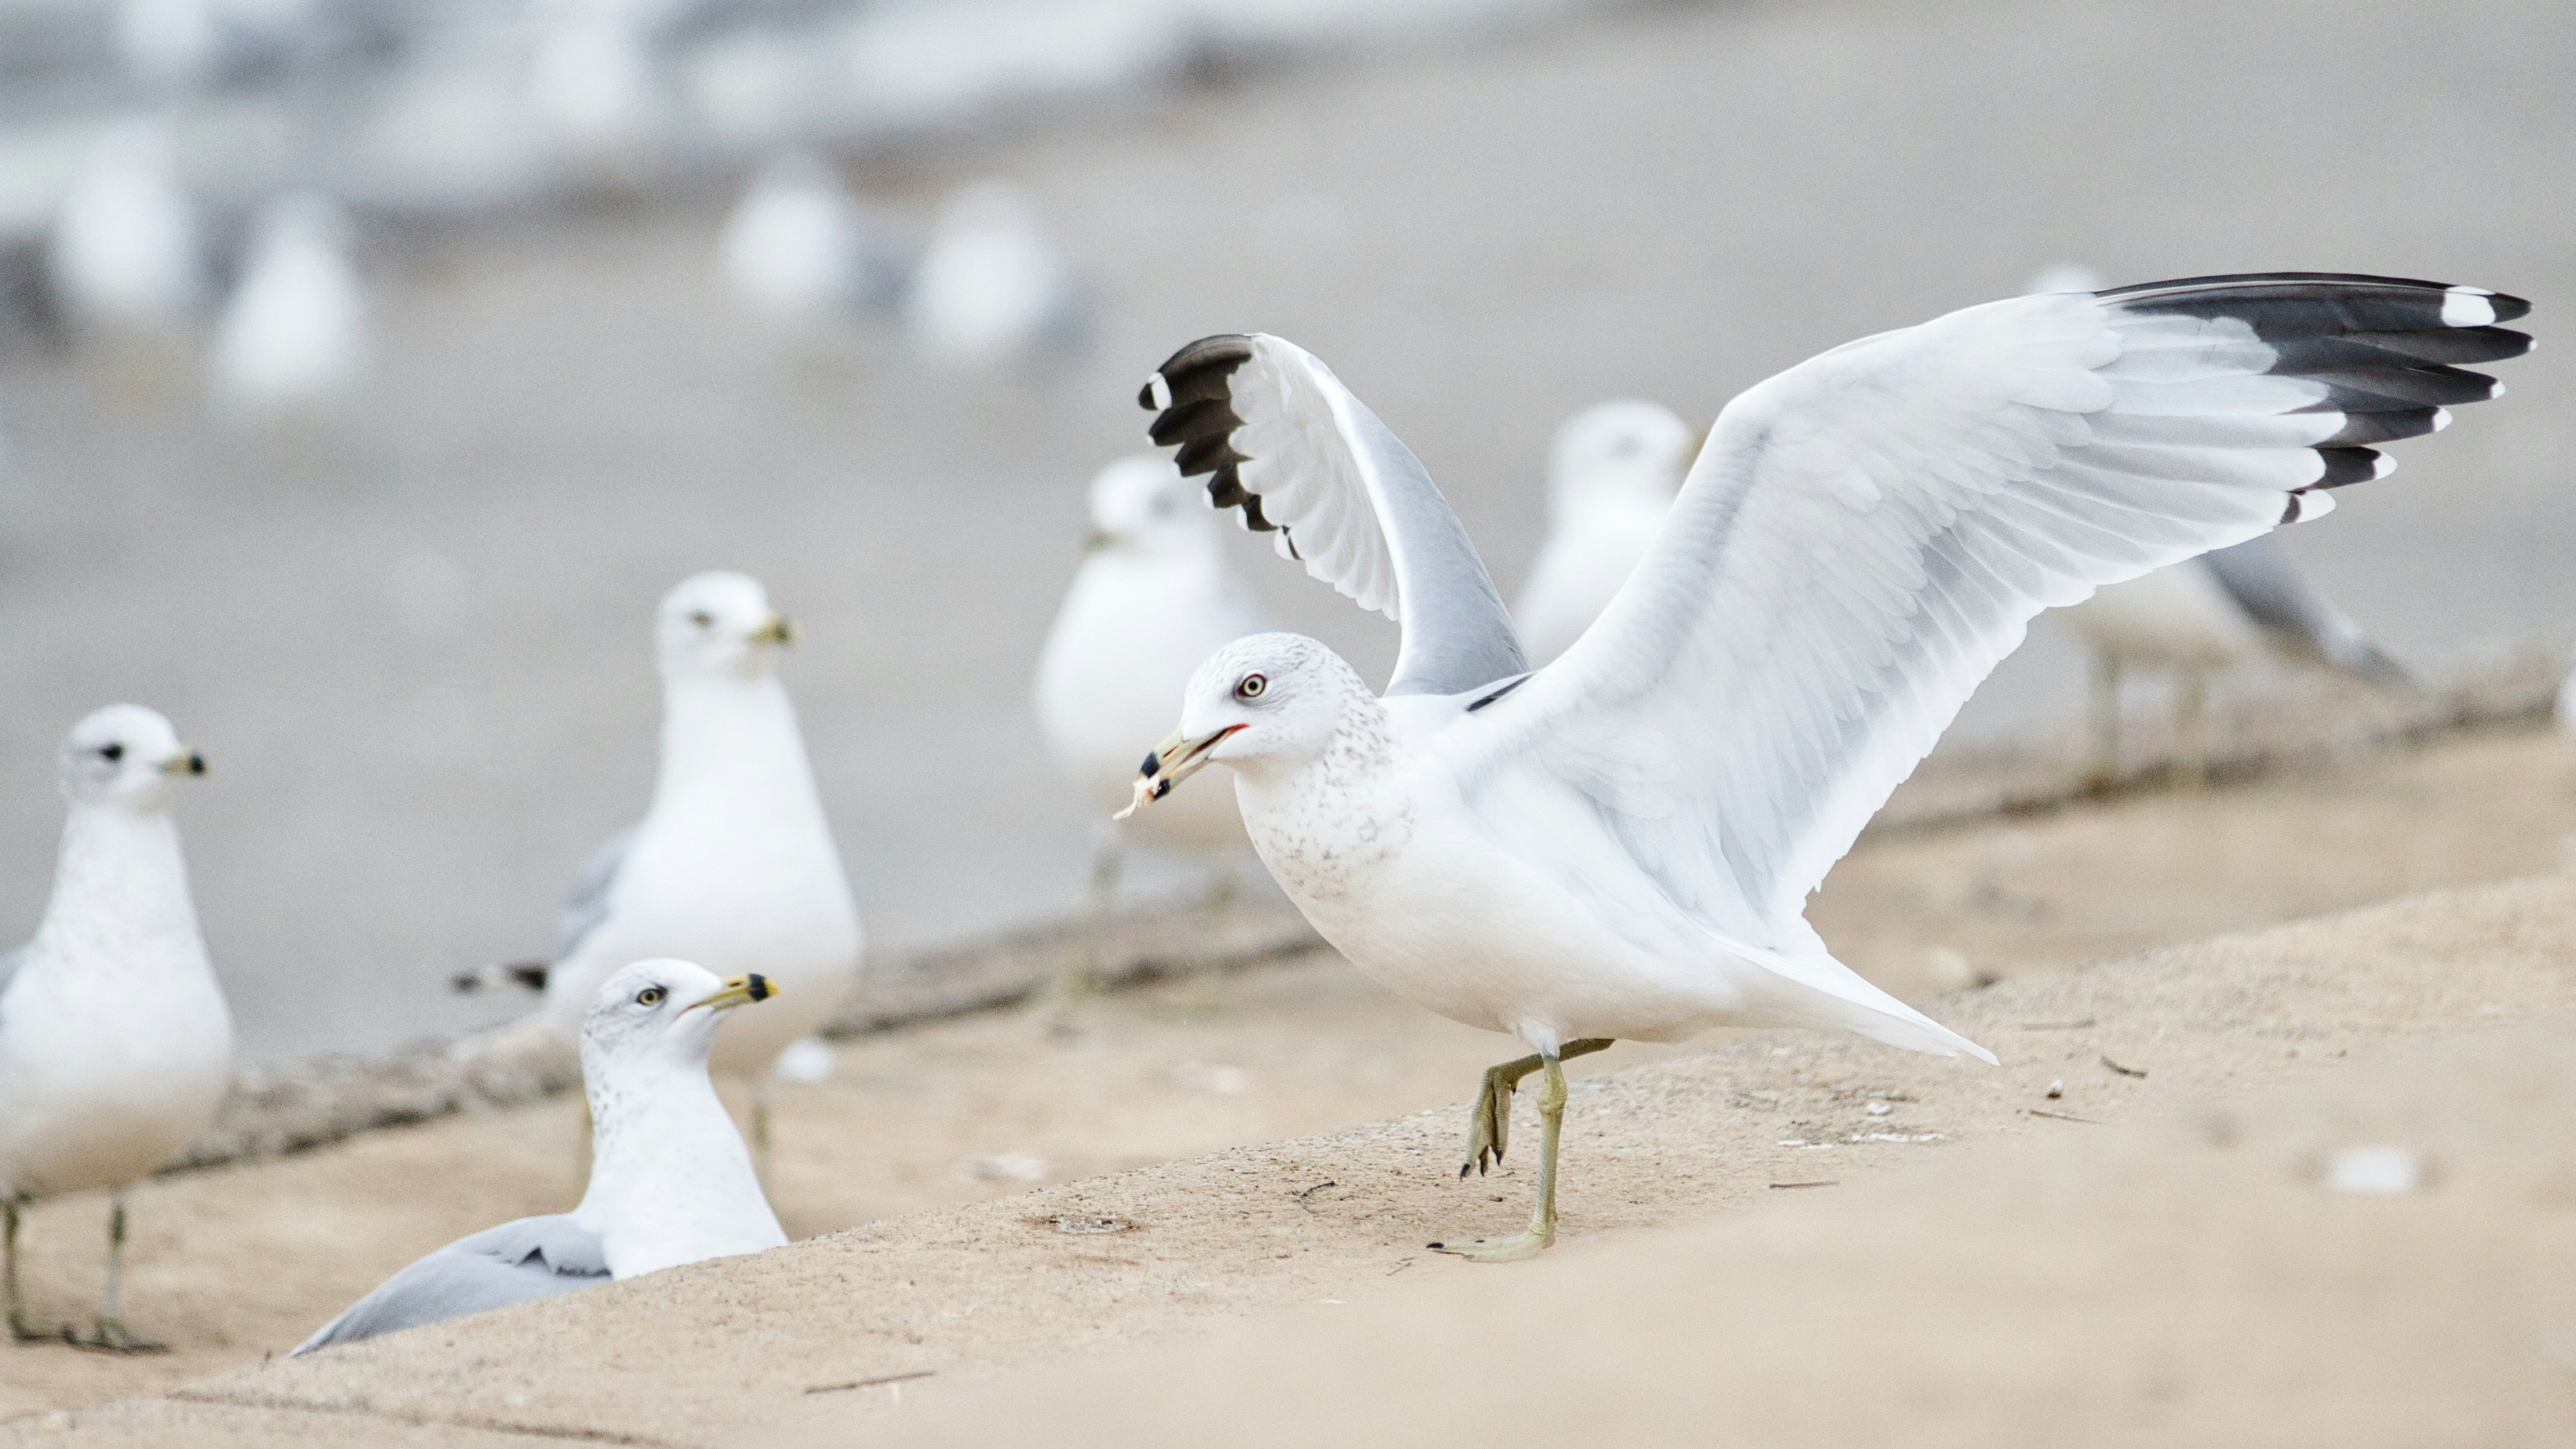 Seagulls looking jealously at a proud seagull with food